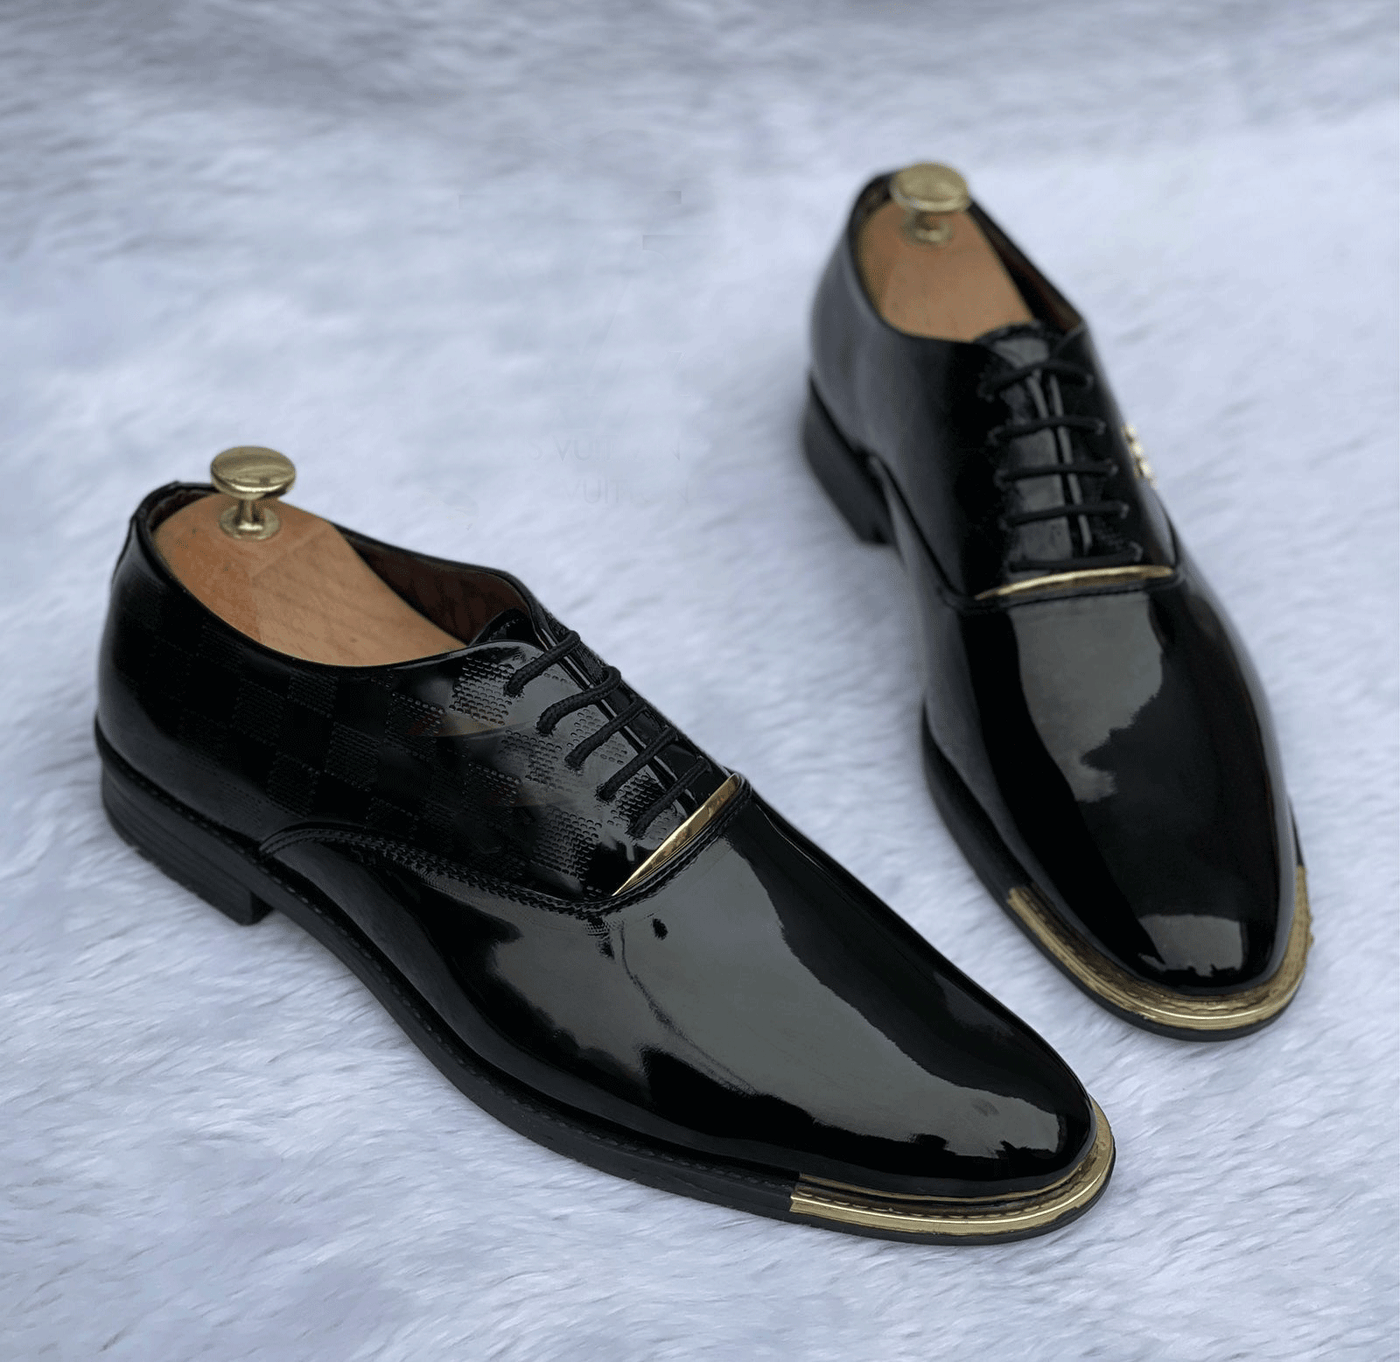 Shiny Black Business Formal Wedding Party Wear Shoes For Men-Unique And Classy